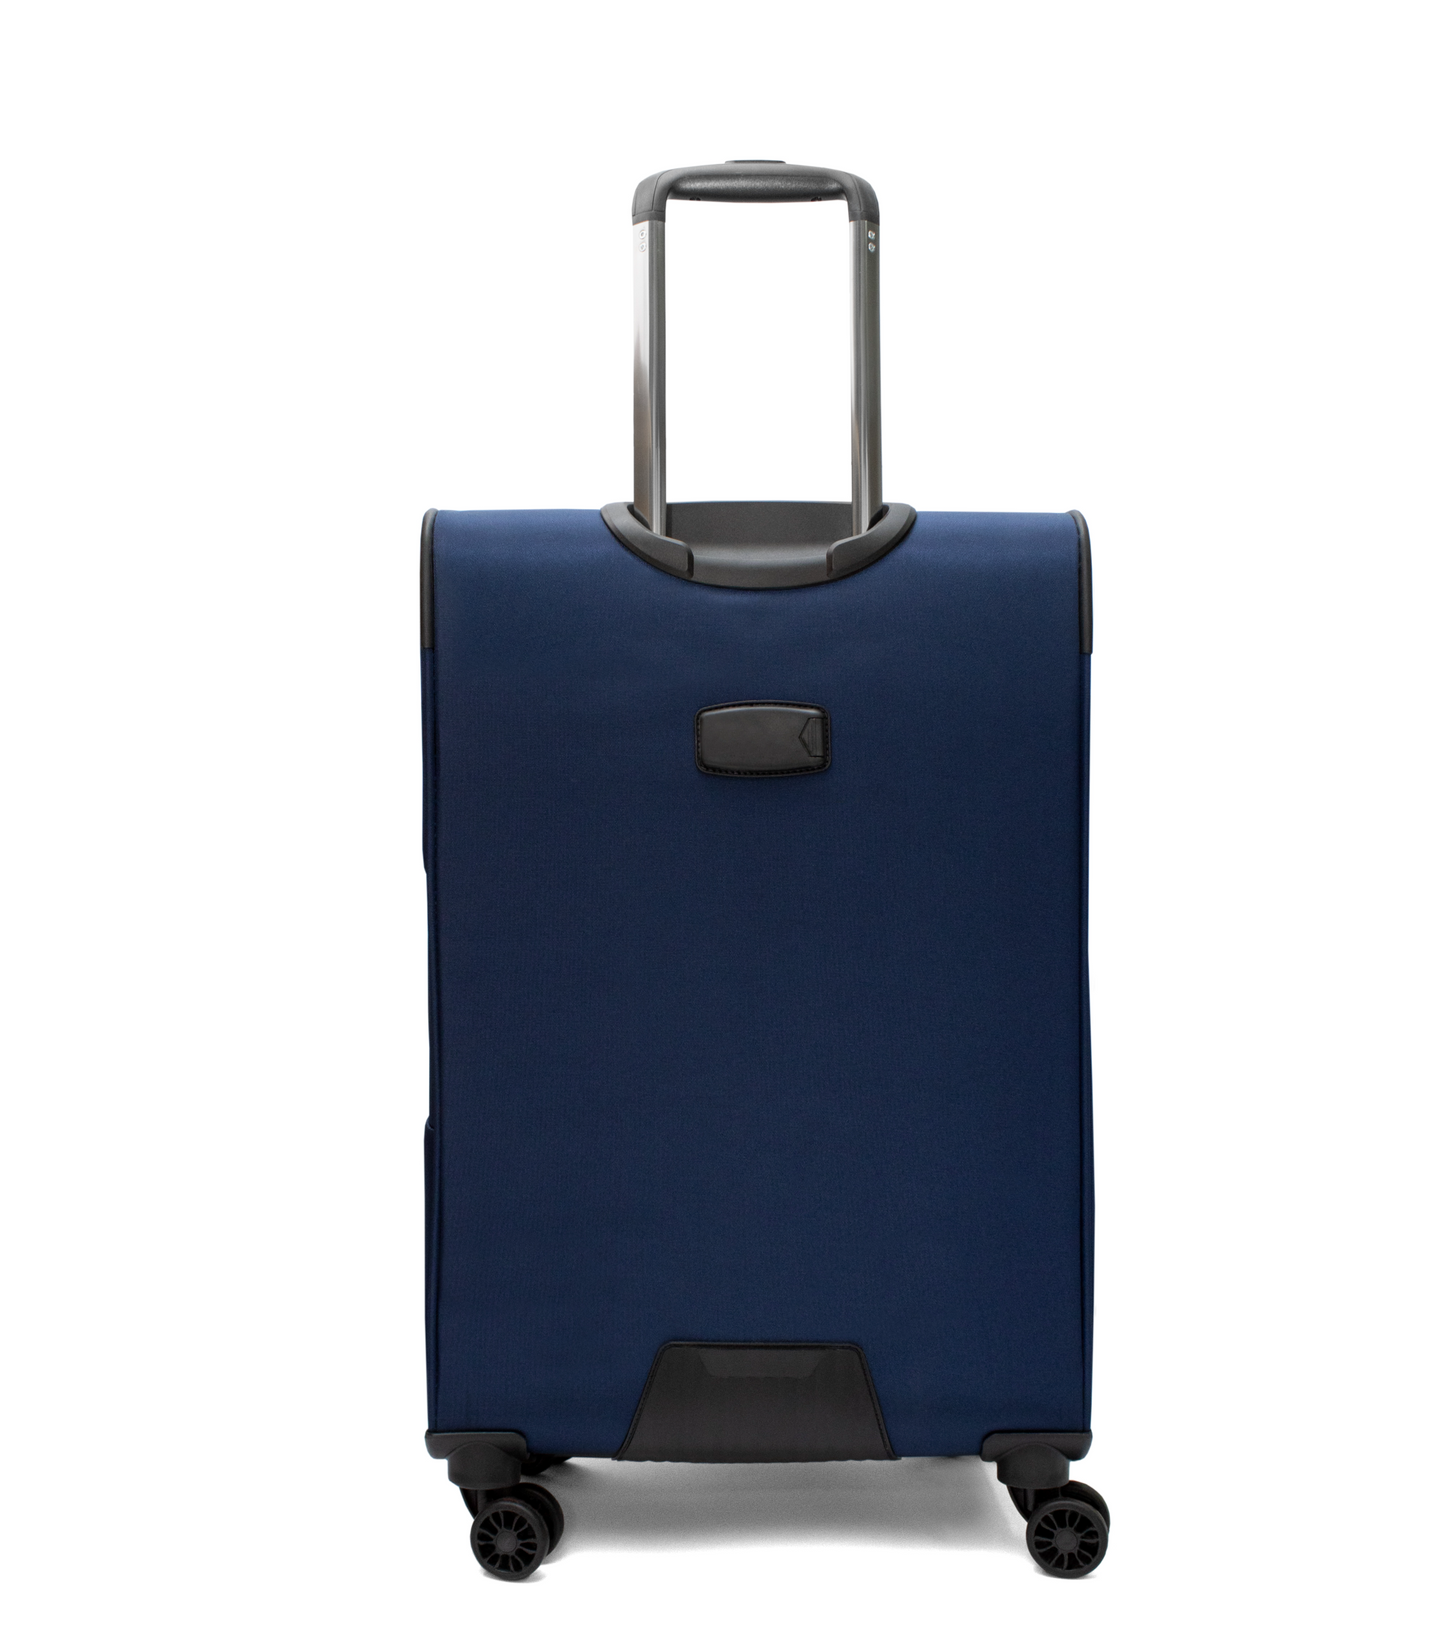 Cavalinho Check-in Softside Luggage (24" or 28") - 24 inch SteelBlue - 68020003.03.24_3